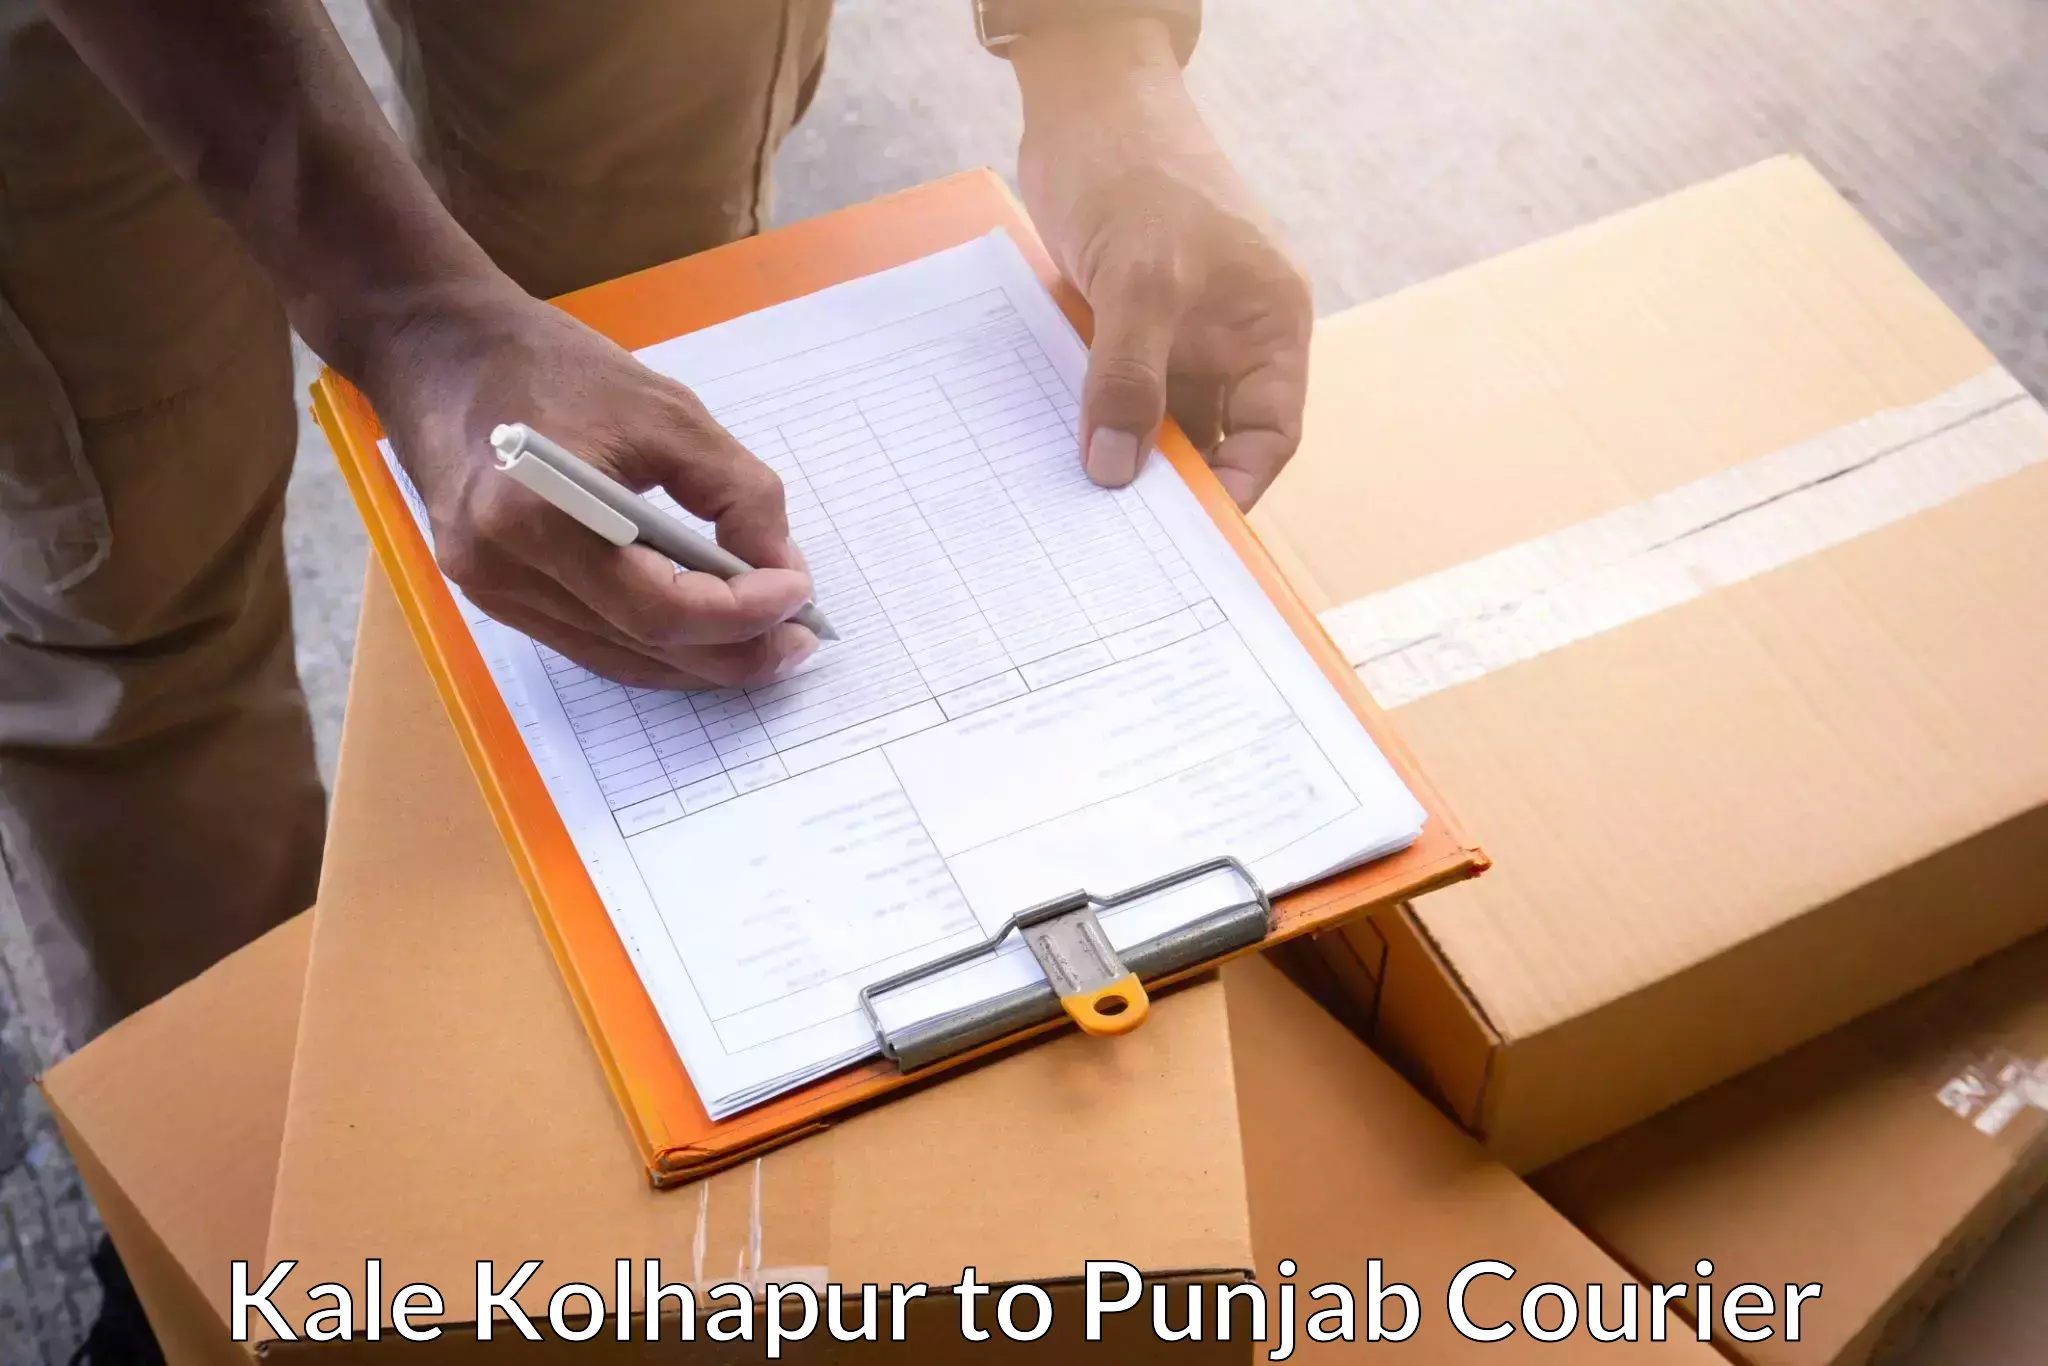 State-of-the-art courier technology Kale Kolhapur to Anandpur Sahib